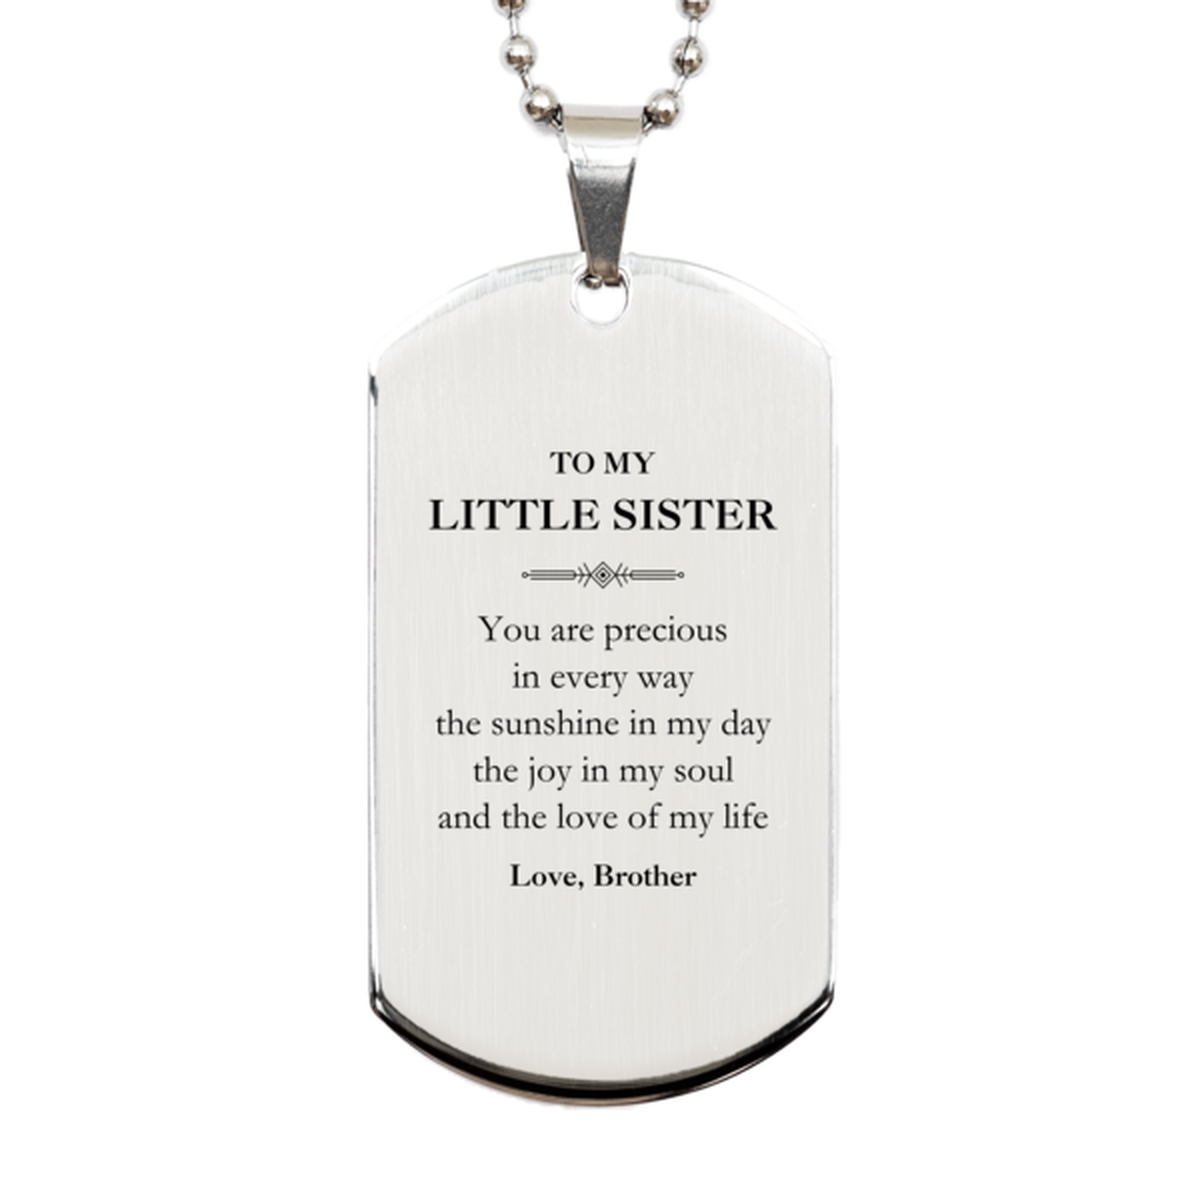 Graduation Gifts for Little Sister Silver Dog Tag Present from Brother, Christmas Little Sister Birthday Gifts Little Sister You are precious in every way the sunshine in my day. Love, Brother